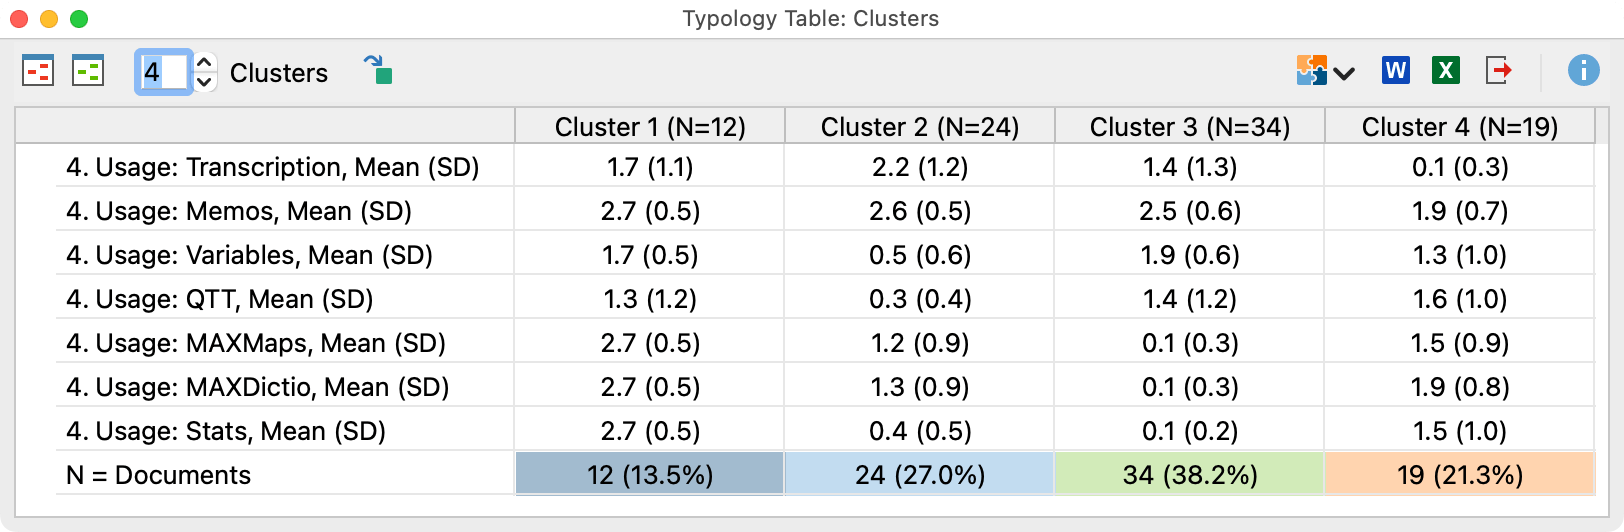 Typology table with information on the individual clusters